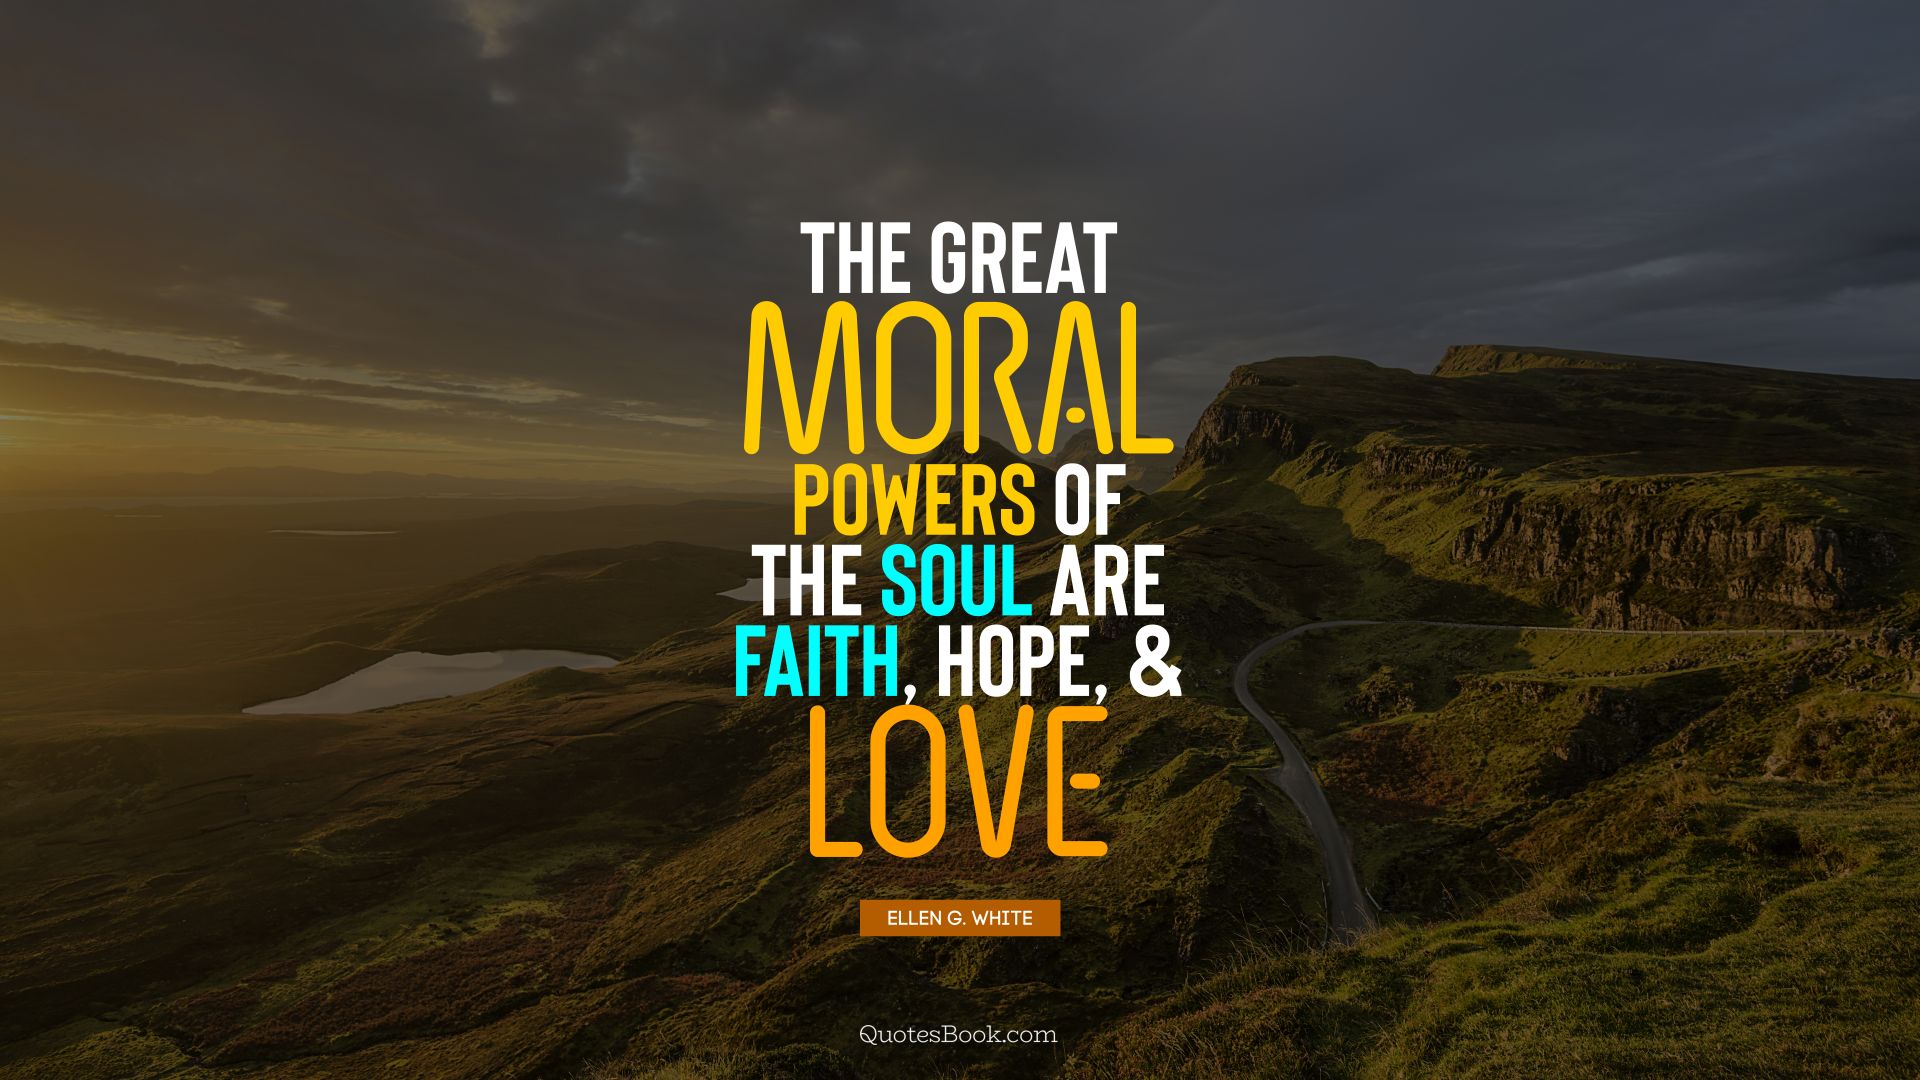 The great moral powers of the soul are faith, hope, and love. - Quote by Ellen G. White